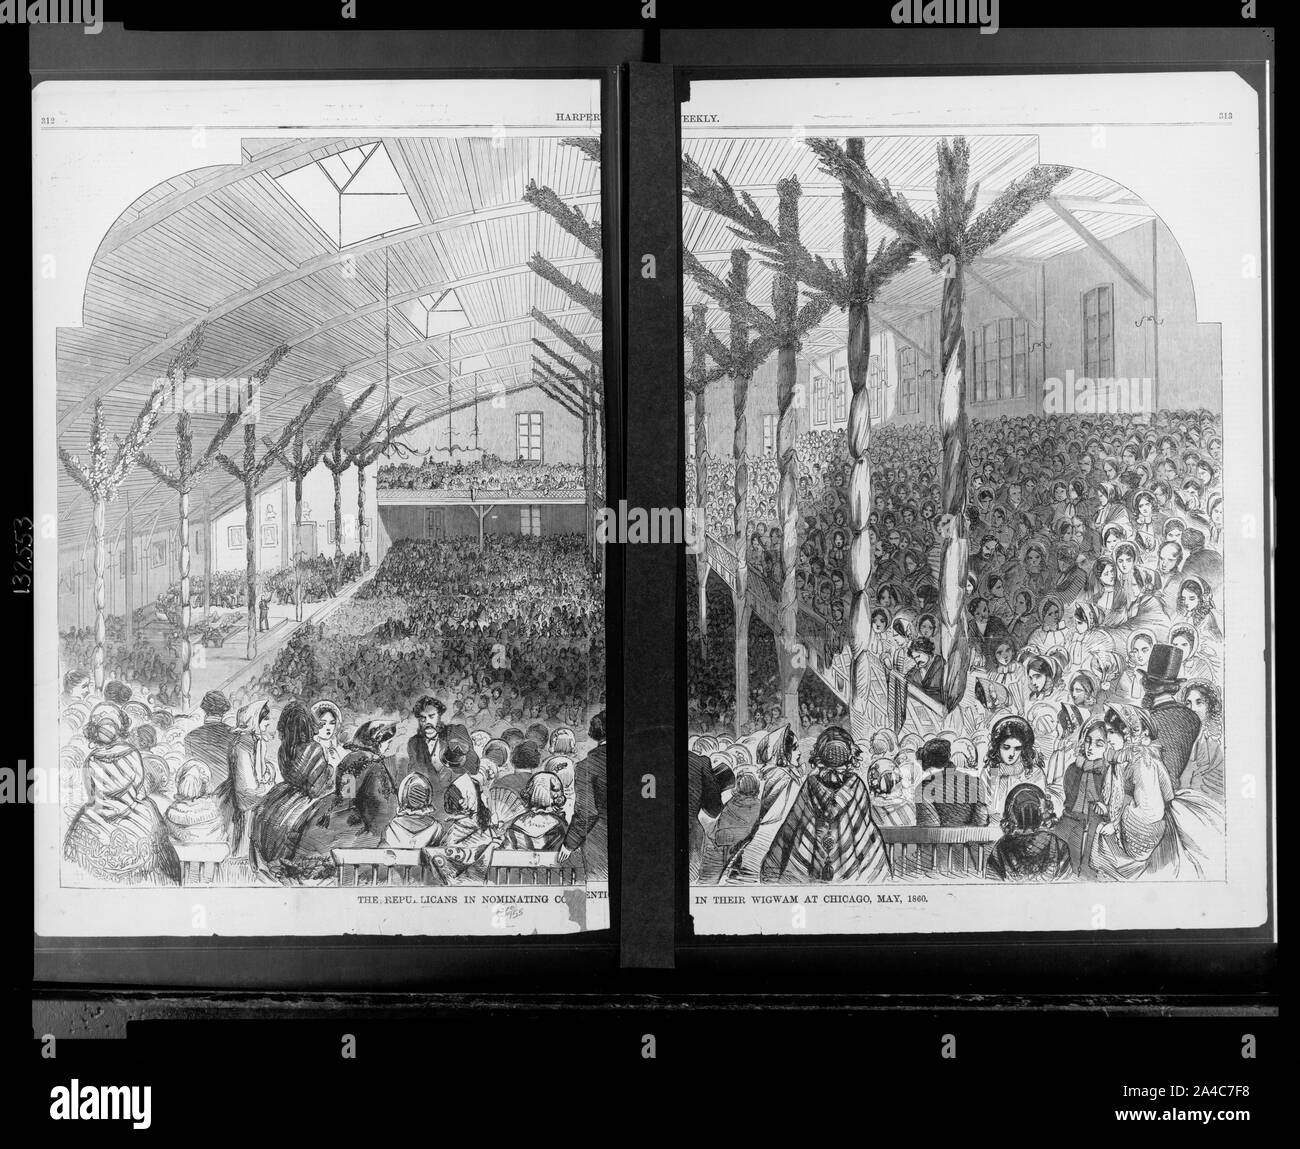 The Republicans in nominating co[nv]ent[ion] in their wigwam at Chicago, May 1860 Stock Photo